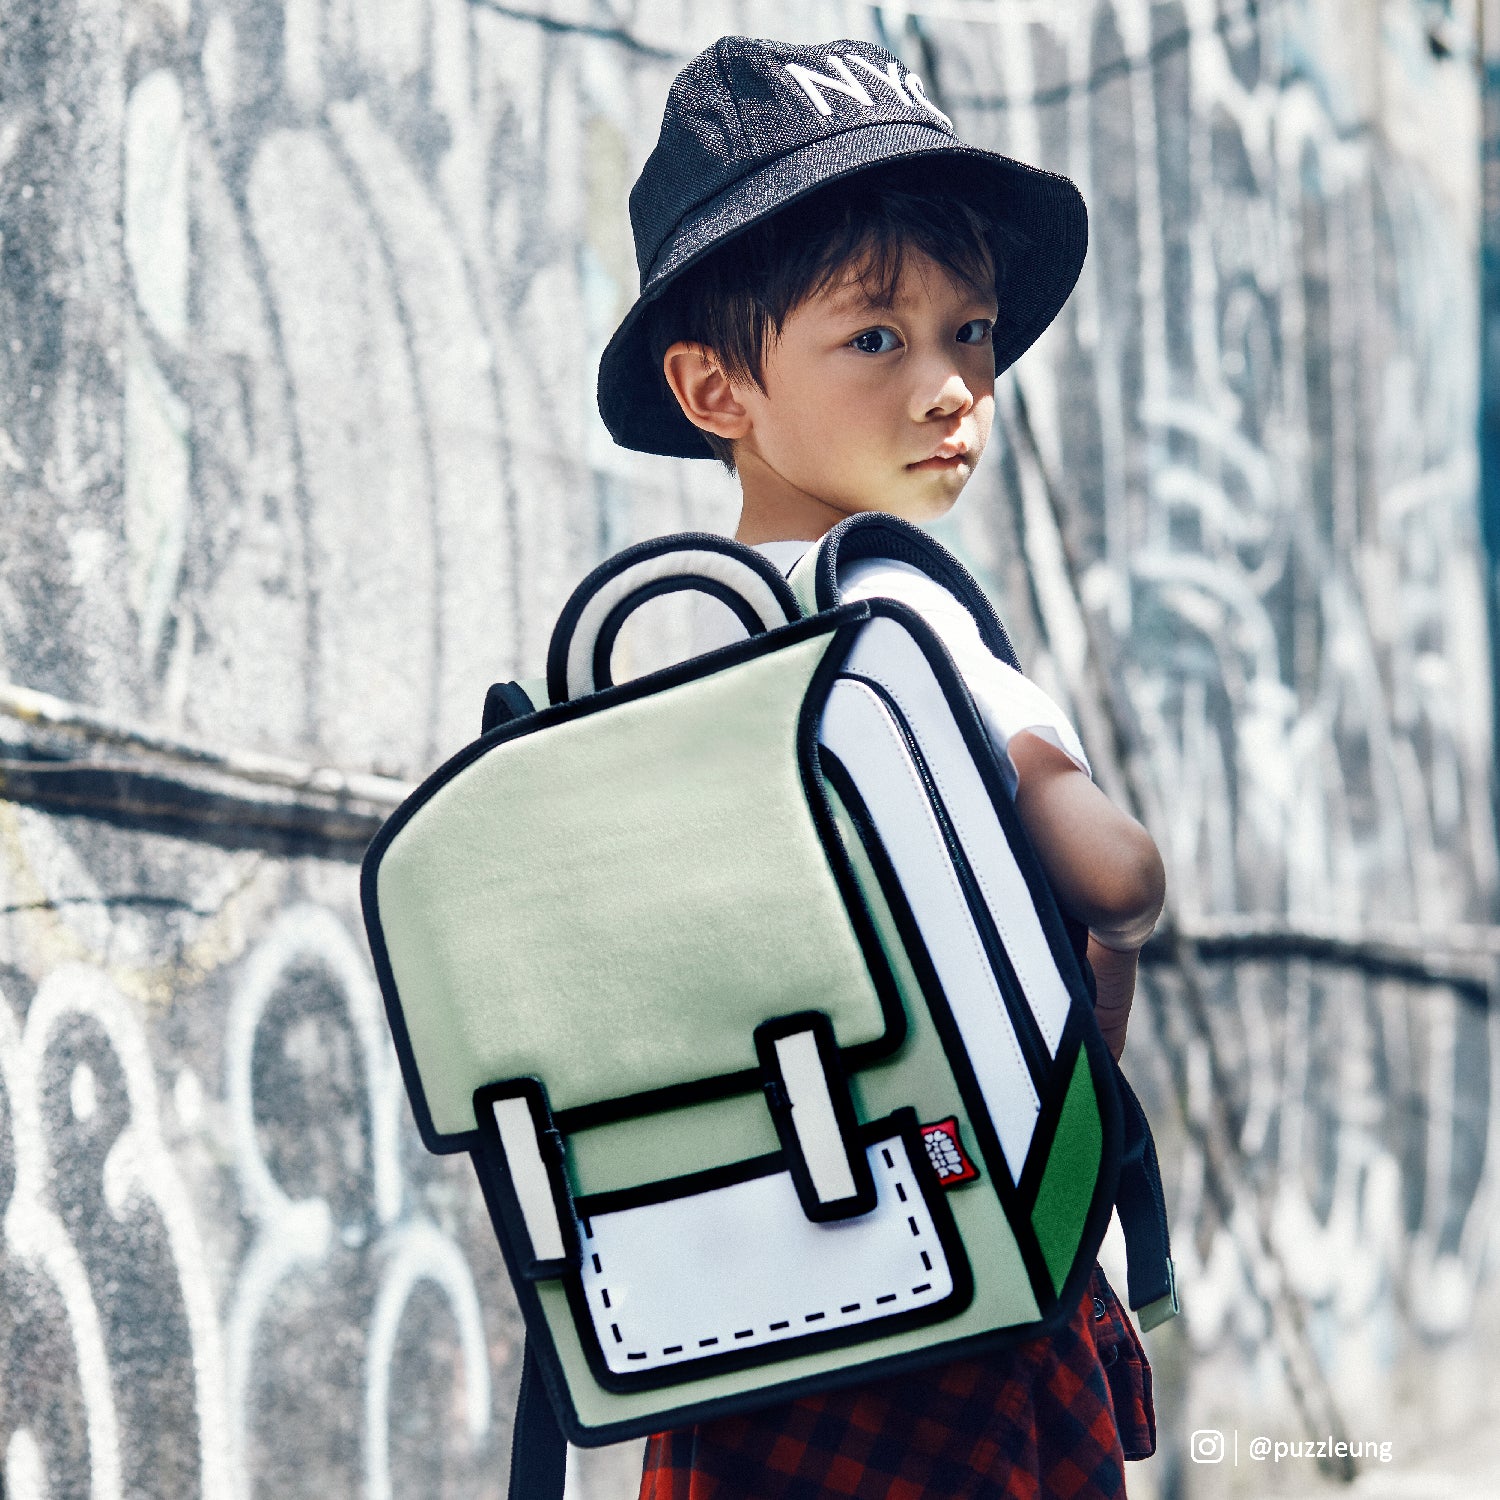 Junior Greenery Spaceman Backpack - JumpFromPaper